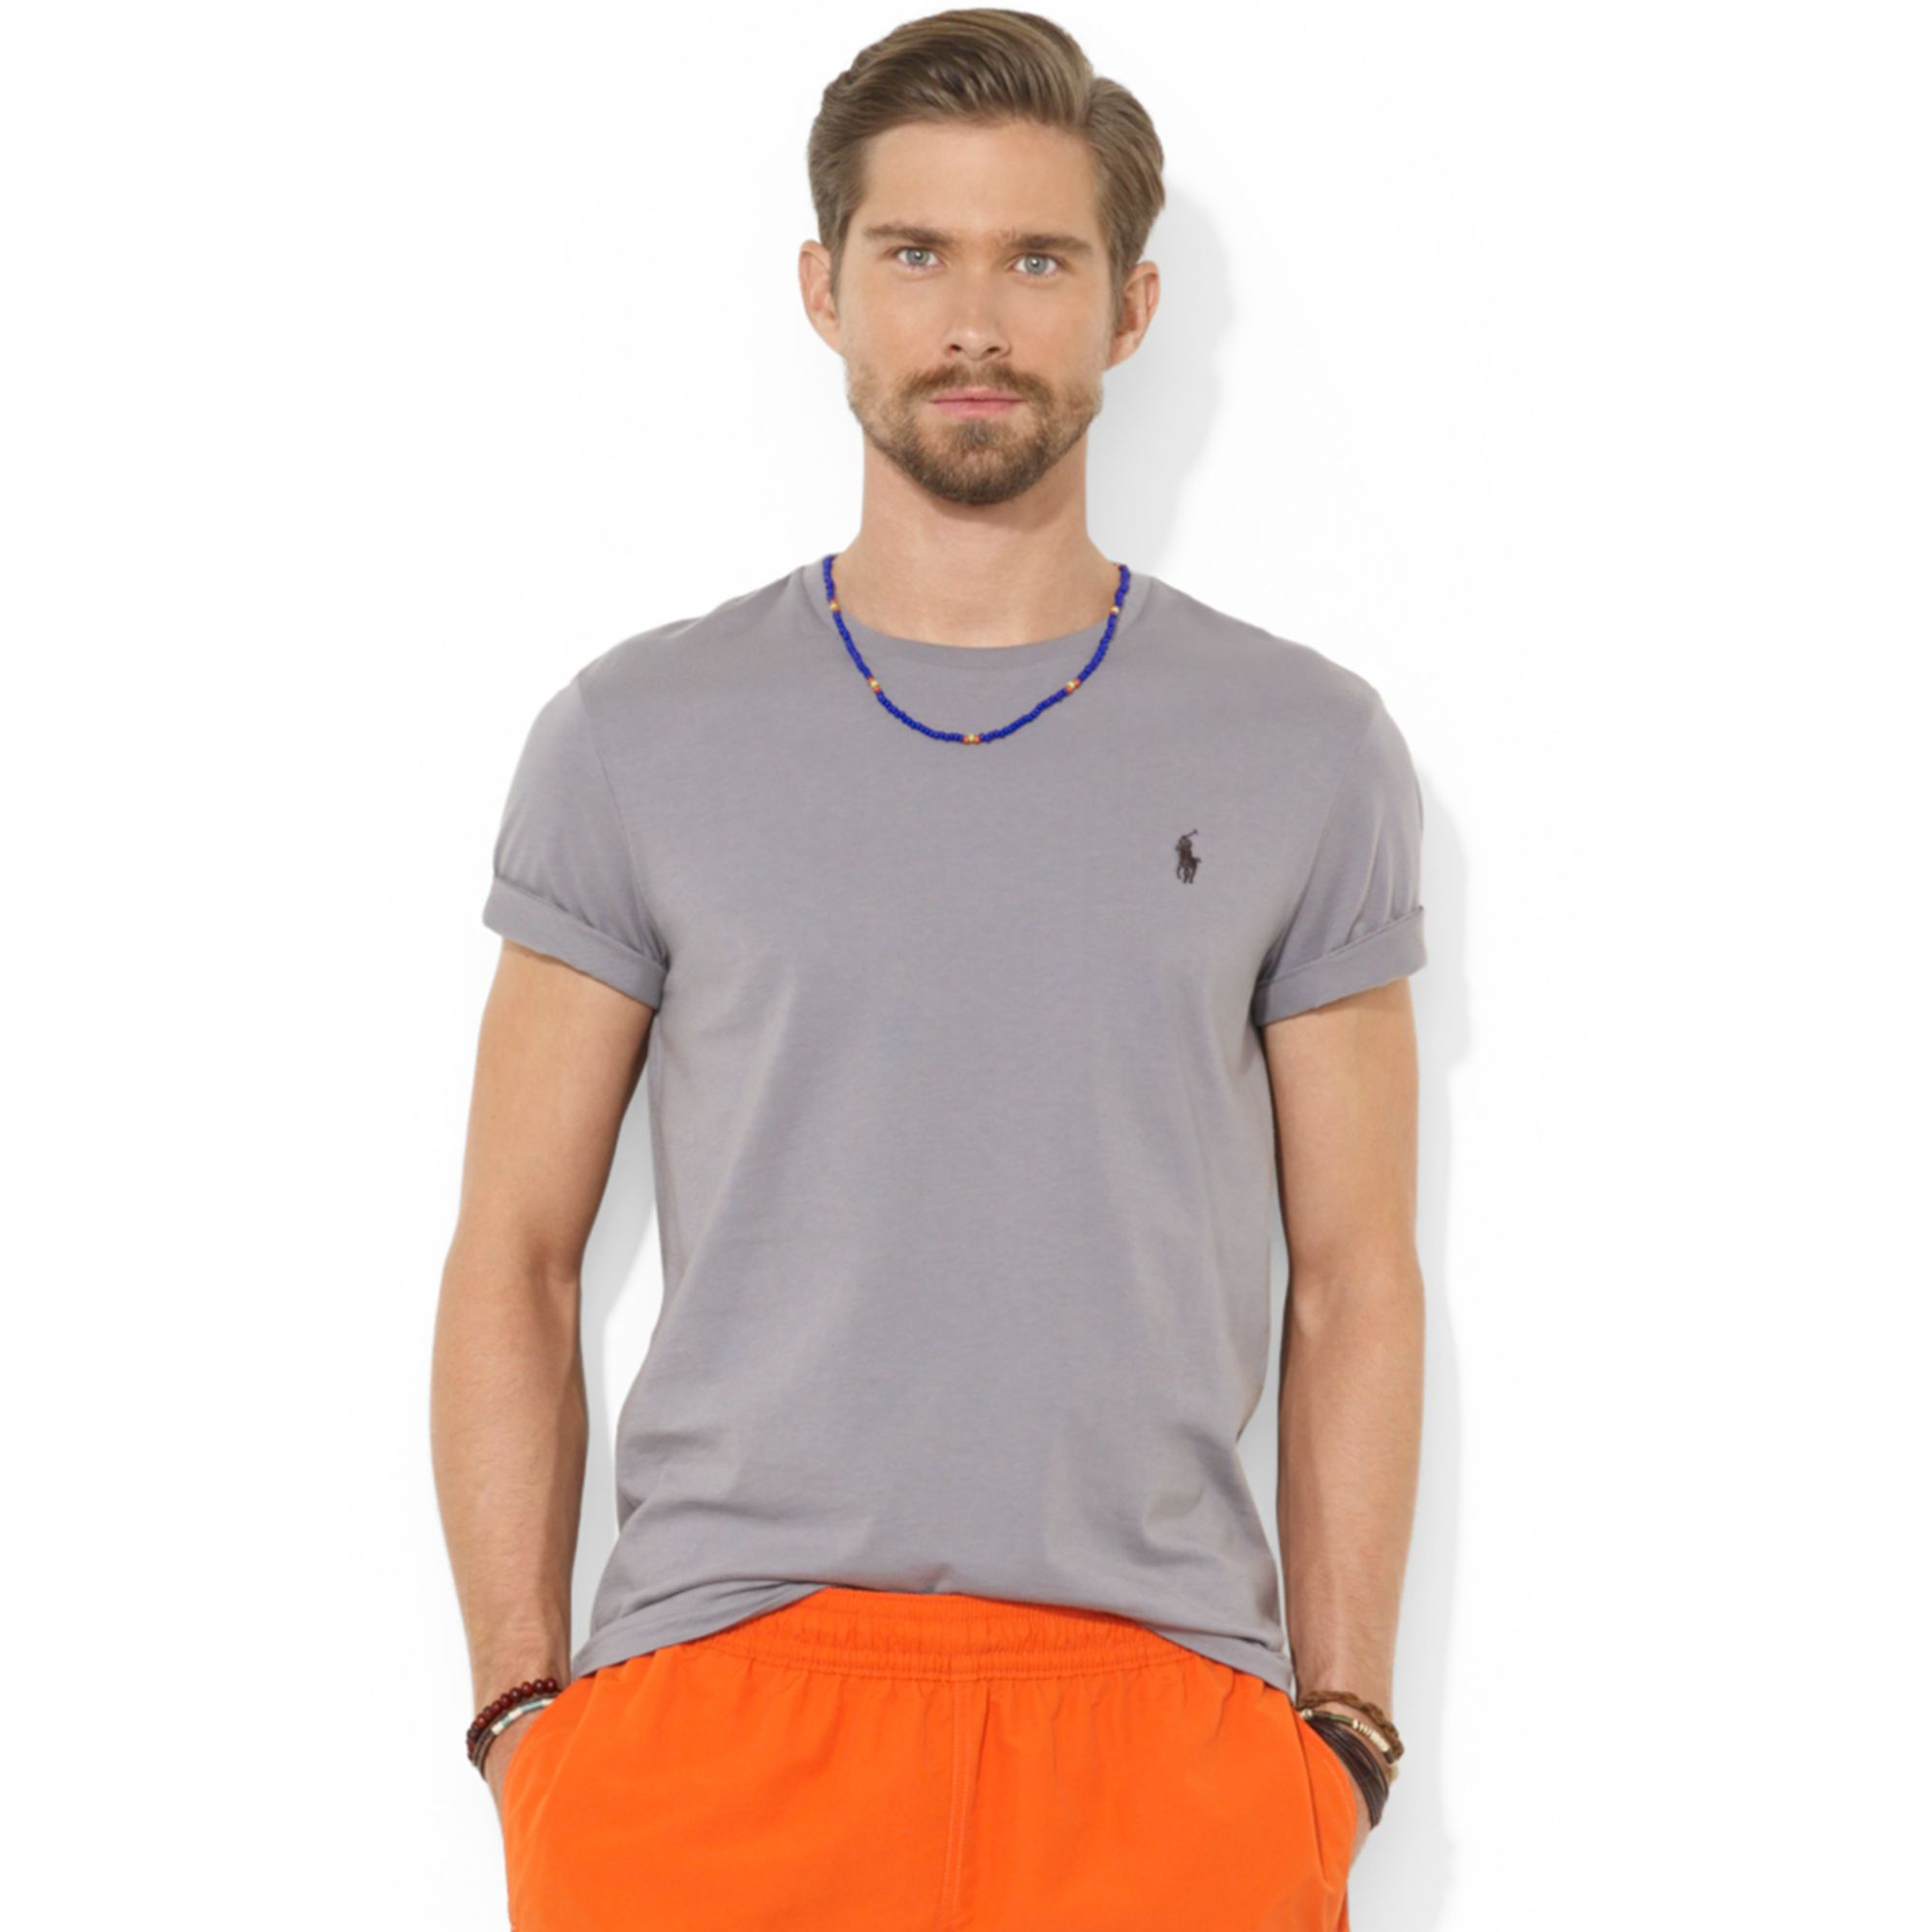 Polo Ralph Lauren is the pinnacle of style and design.These mens t-shirts feature a custom slim fit design to add a more slimmer look.Dress casually with a pair of jeans or use as an undershirt.Stay in style with Polo Ralph Lauren/5(34).